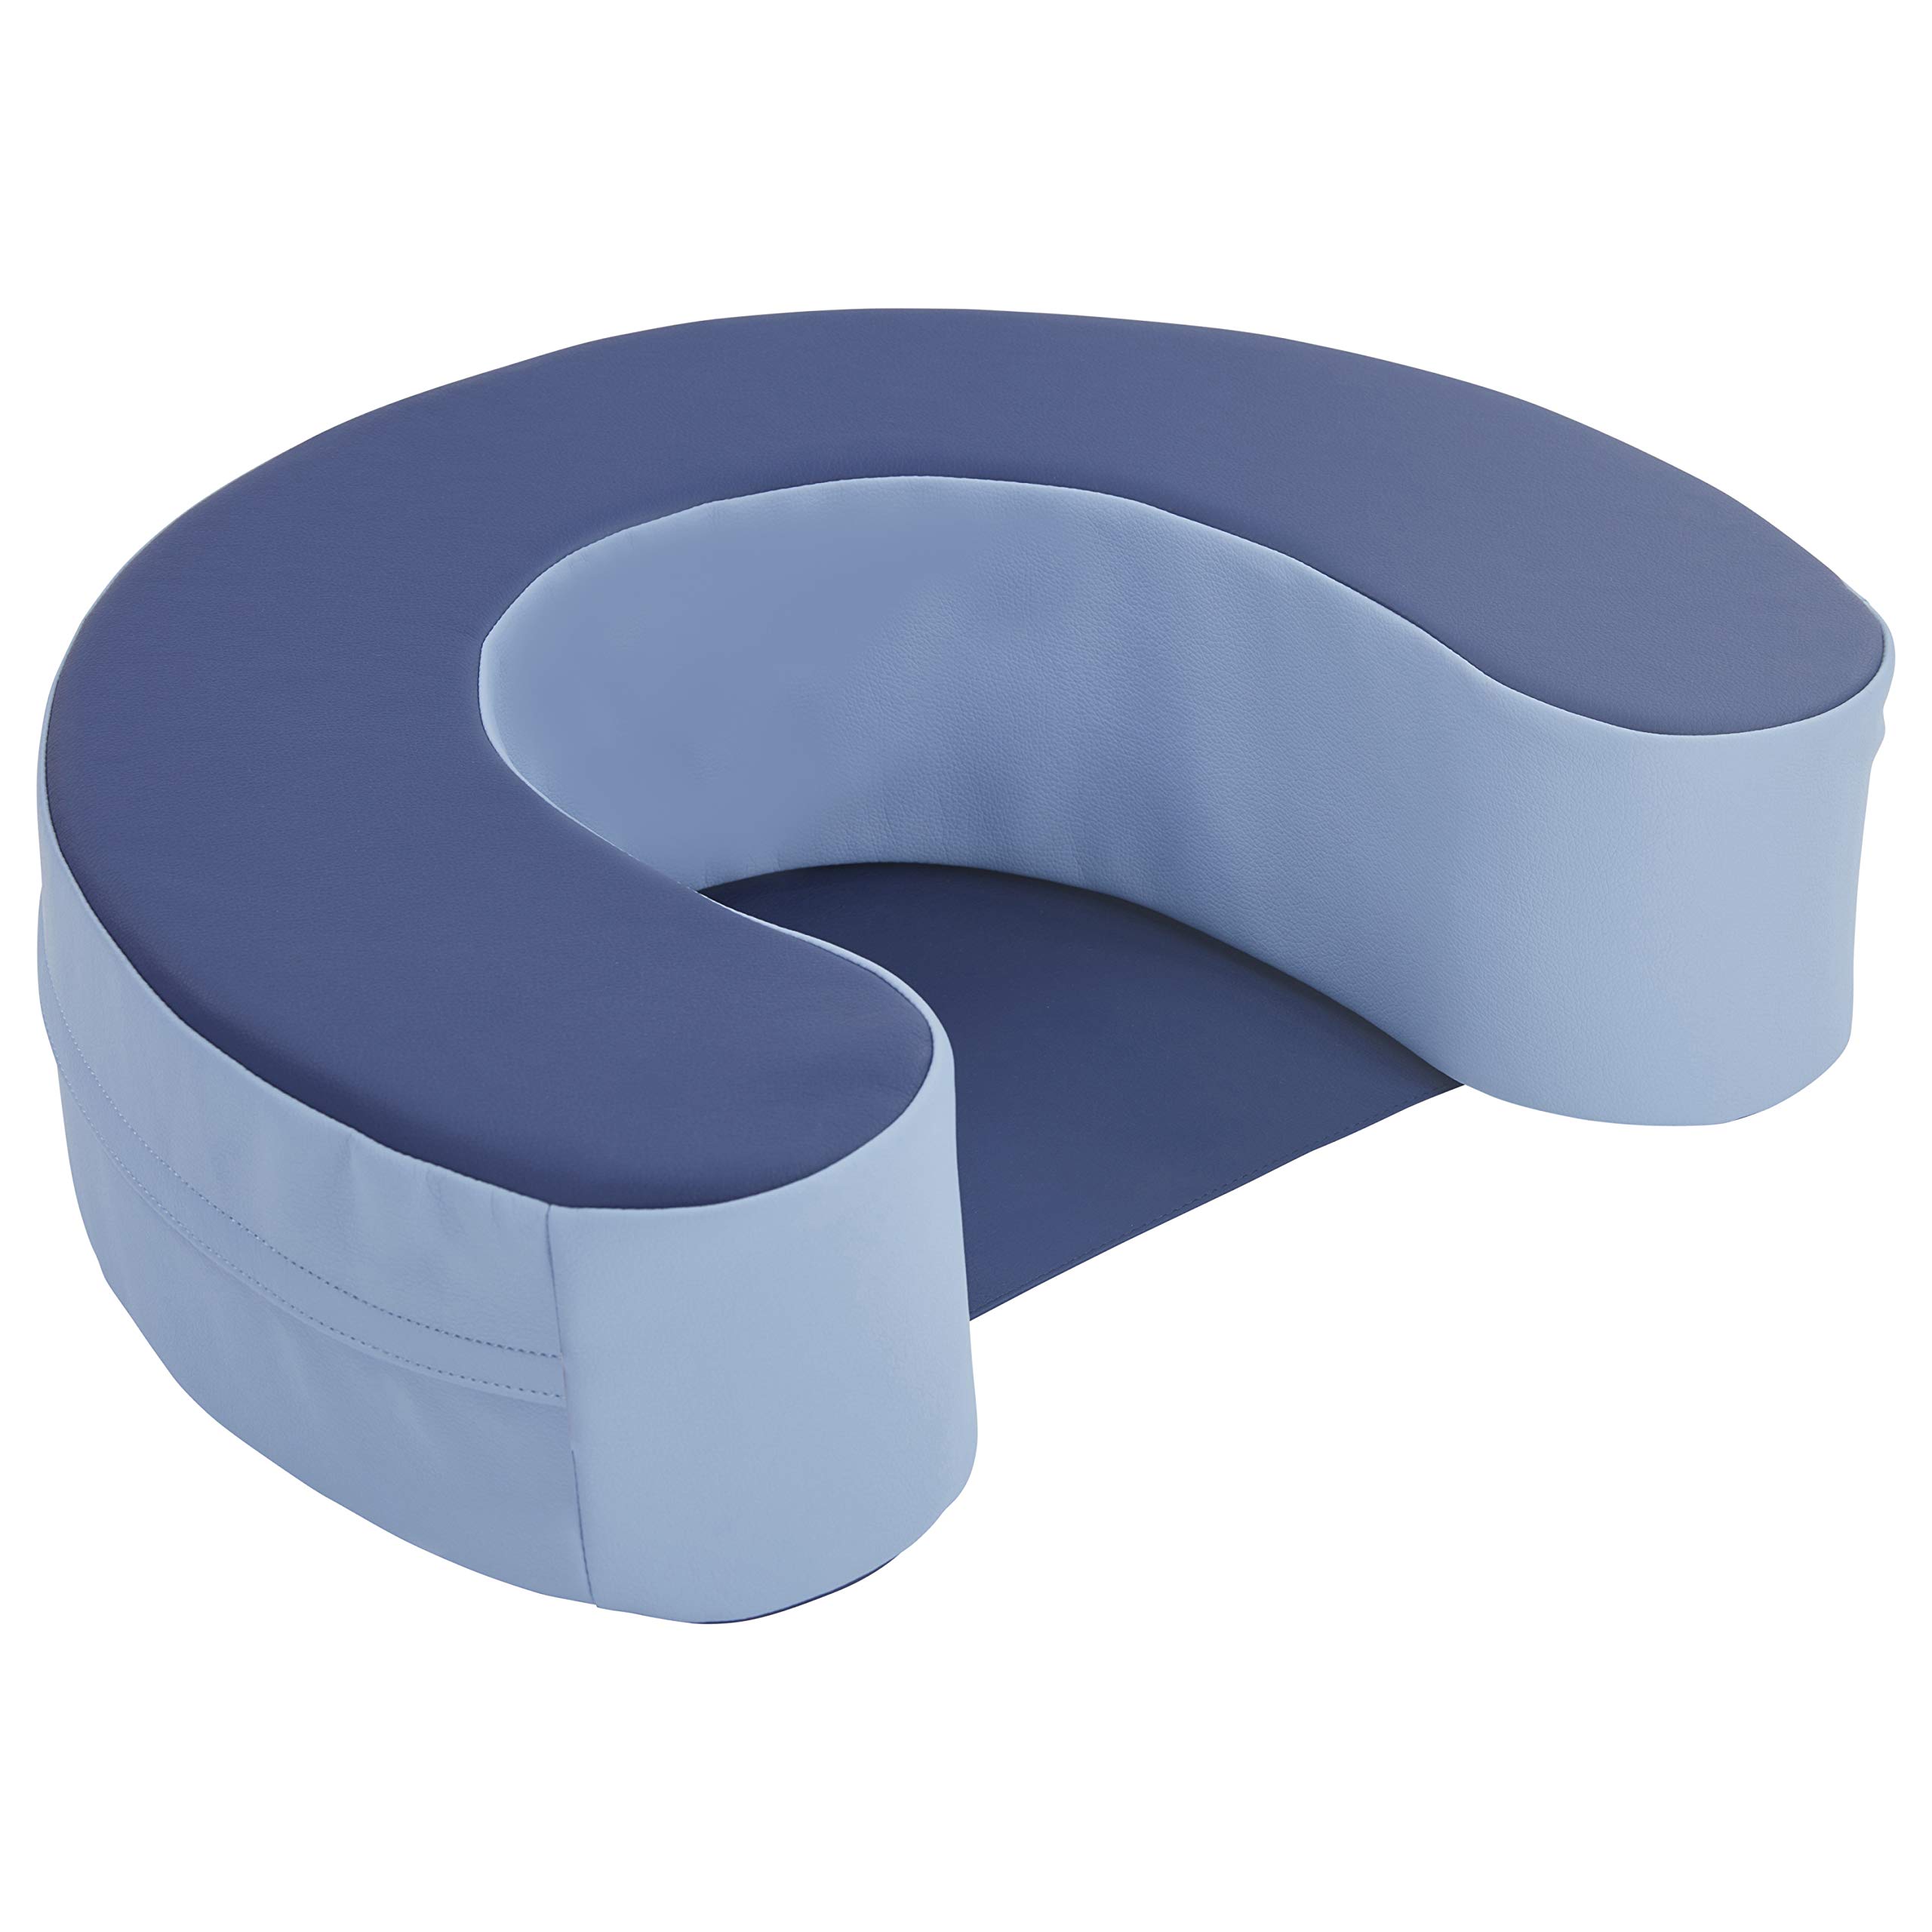 Factory Direct Partners 10423-NVPB SoftScape Sit and Support Ring for Babies and Infants, Cushioned Foam Floor Seat with Non-Slip Bottom for Nursey, Playroom, Daycare - Navy/Powder Blue